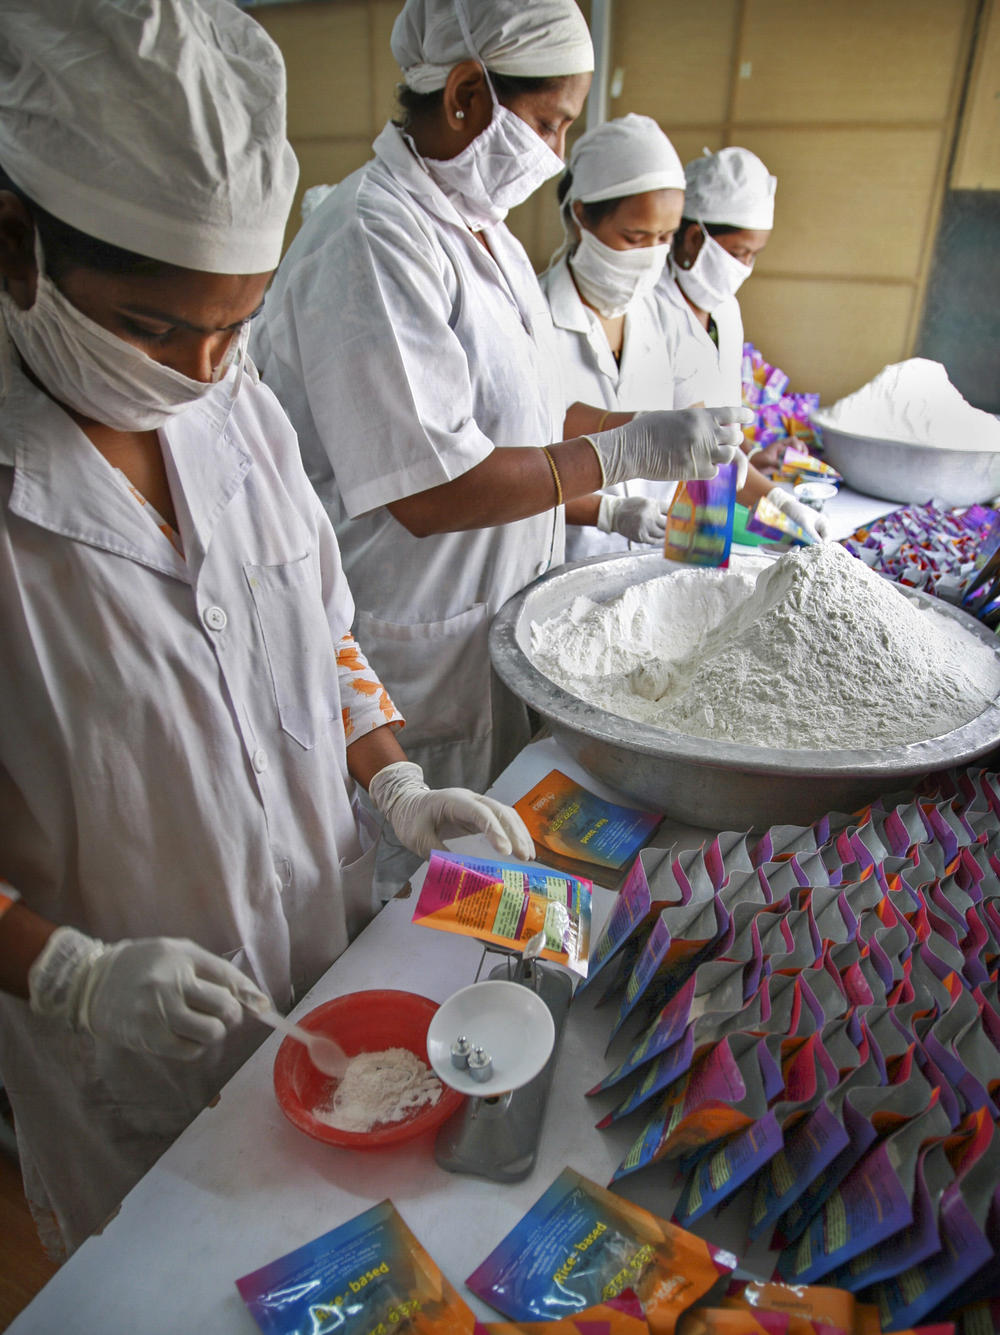 Health workers  prepare oral rehydration salts at the International Center for Diarrheal Disease Research hospital in Dhaka, Bangladesh.